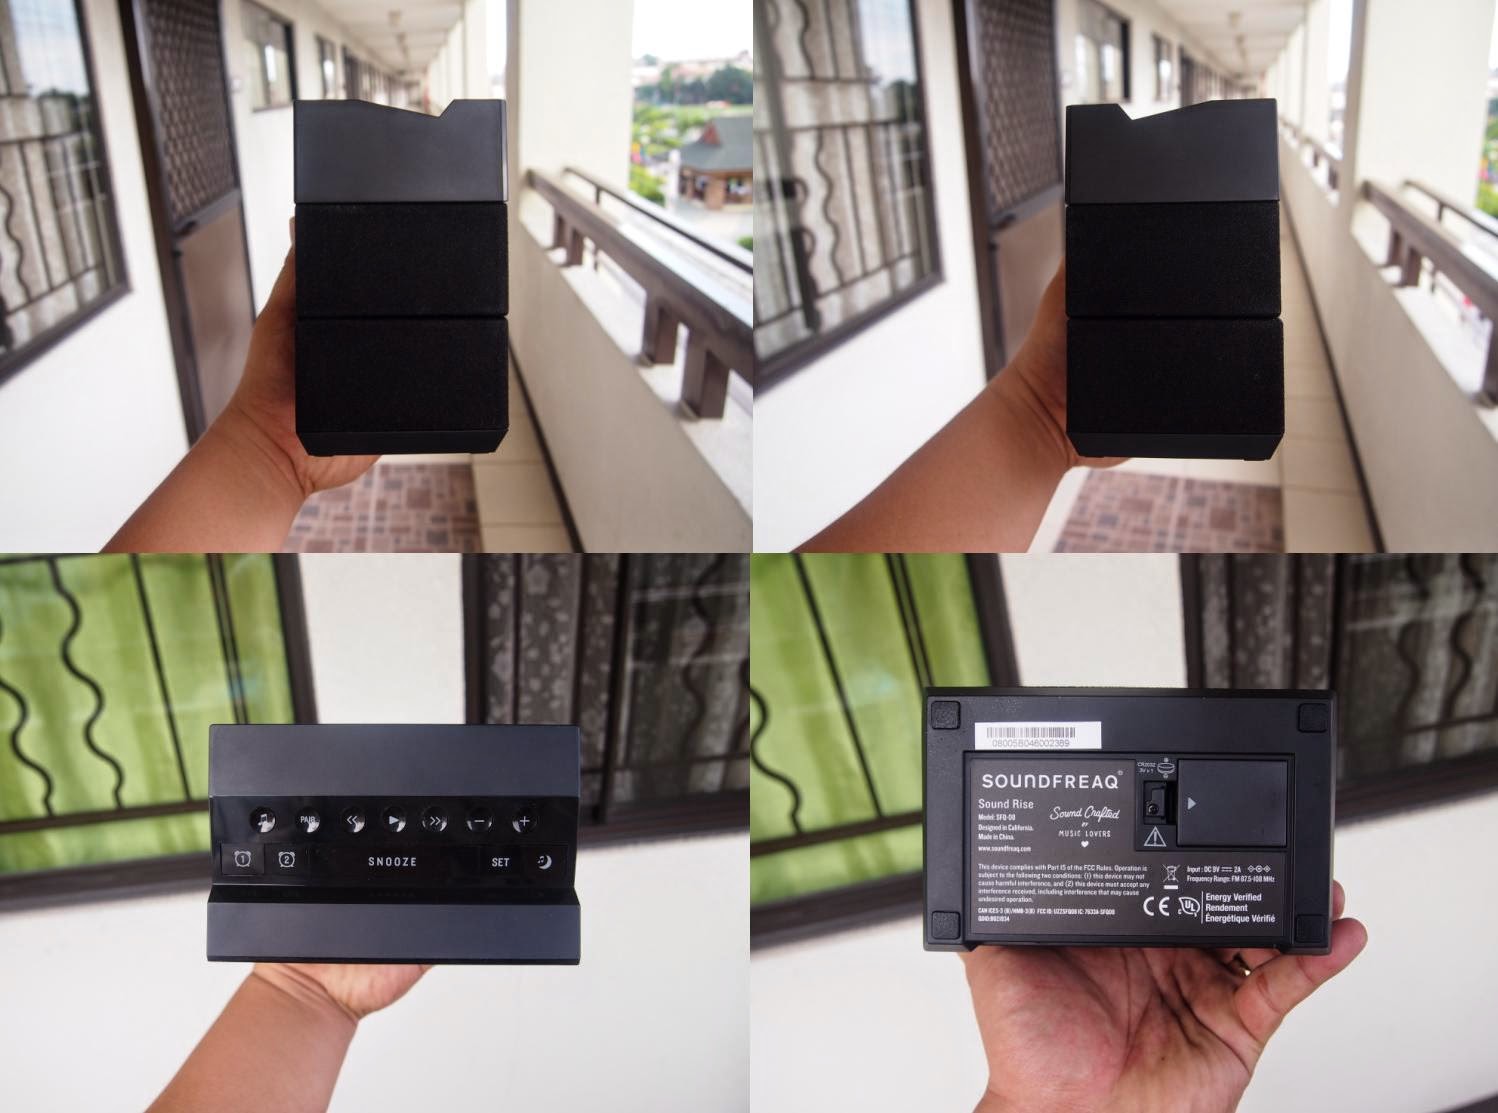 Soundfreaq Sound Rise Unboxing and Review, Alarm Clock Reinvented